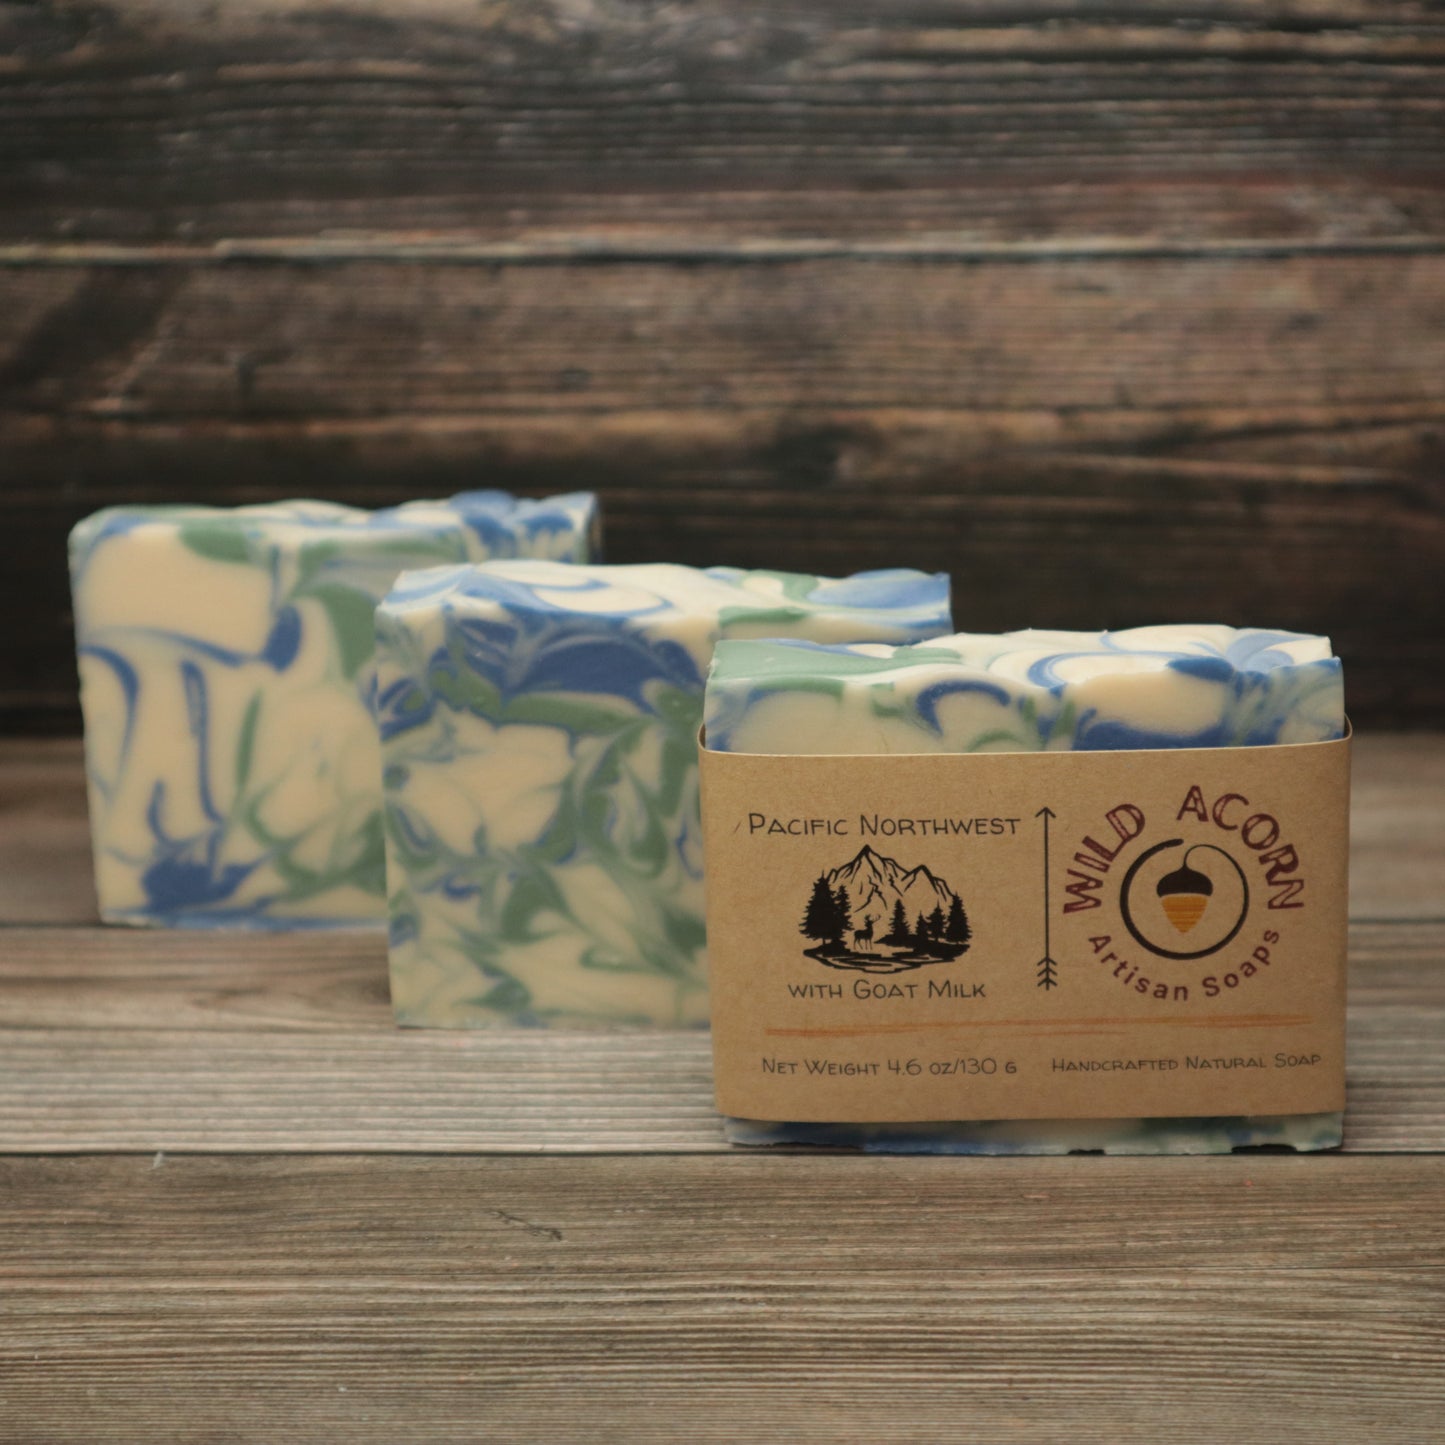 Pacific Northwest with Goat Milk Soap